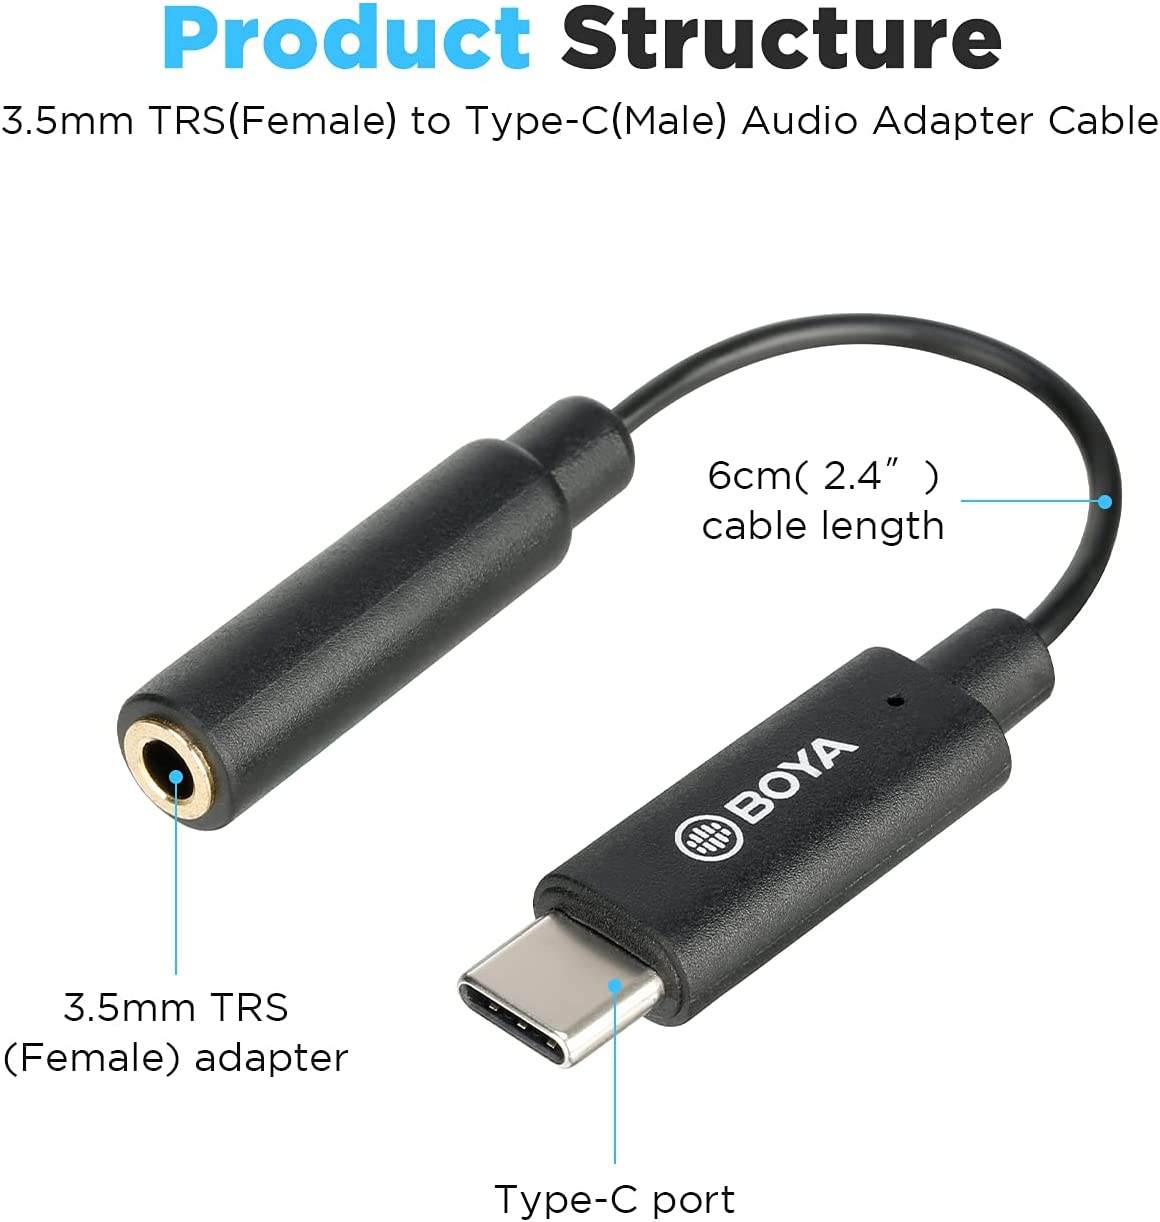 CABLE BOYA 3.5 MM TRS F TO TYPE-C M AUDIO ADAPTER BY-K4